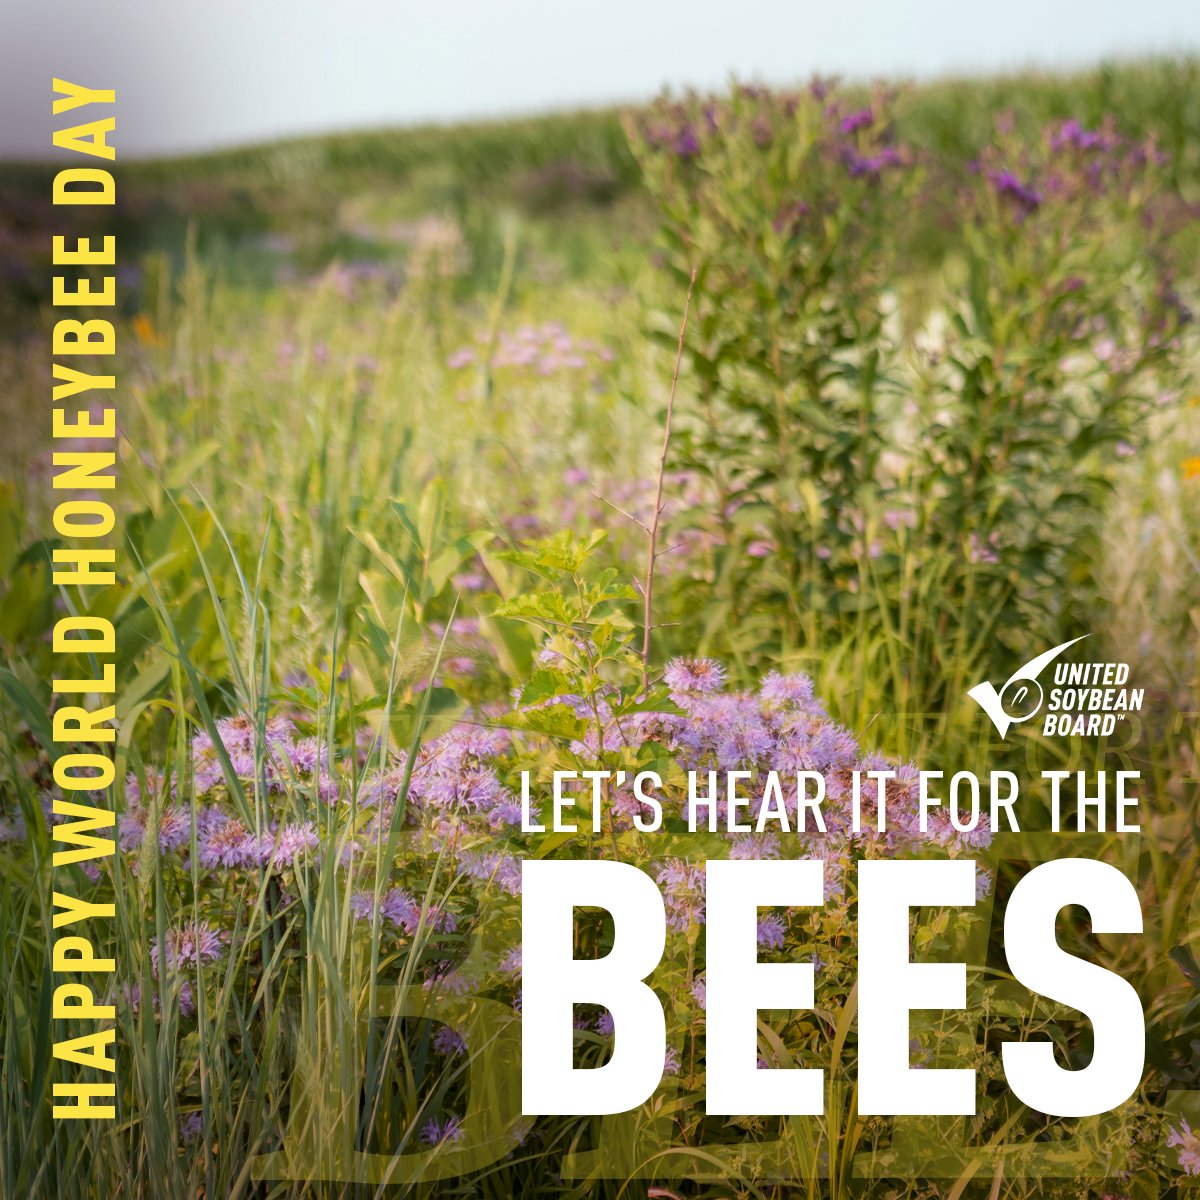 What’s all the buzz about? 🐝 Honey bees! These vital pollinators are declining, and U.S. soybean farmers can play a key role in protecting them. Celebrate #NationalHoneyBeeDay by learning what you can do to help. bit.ly/3KOYoX0 @SoyResearchInfo